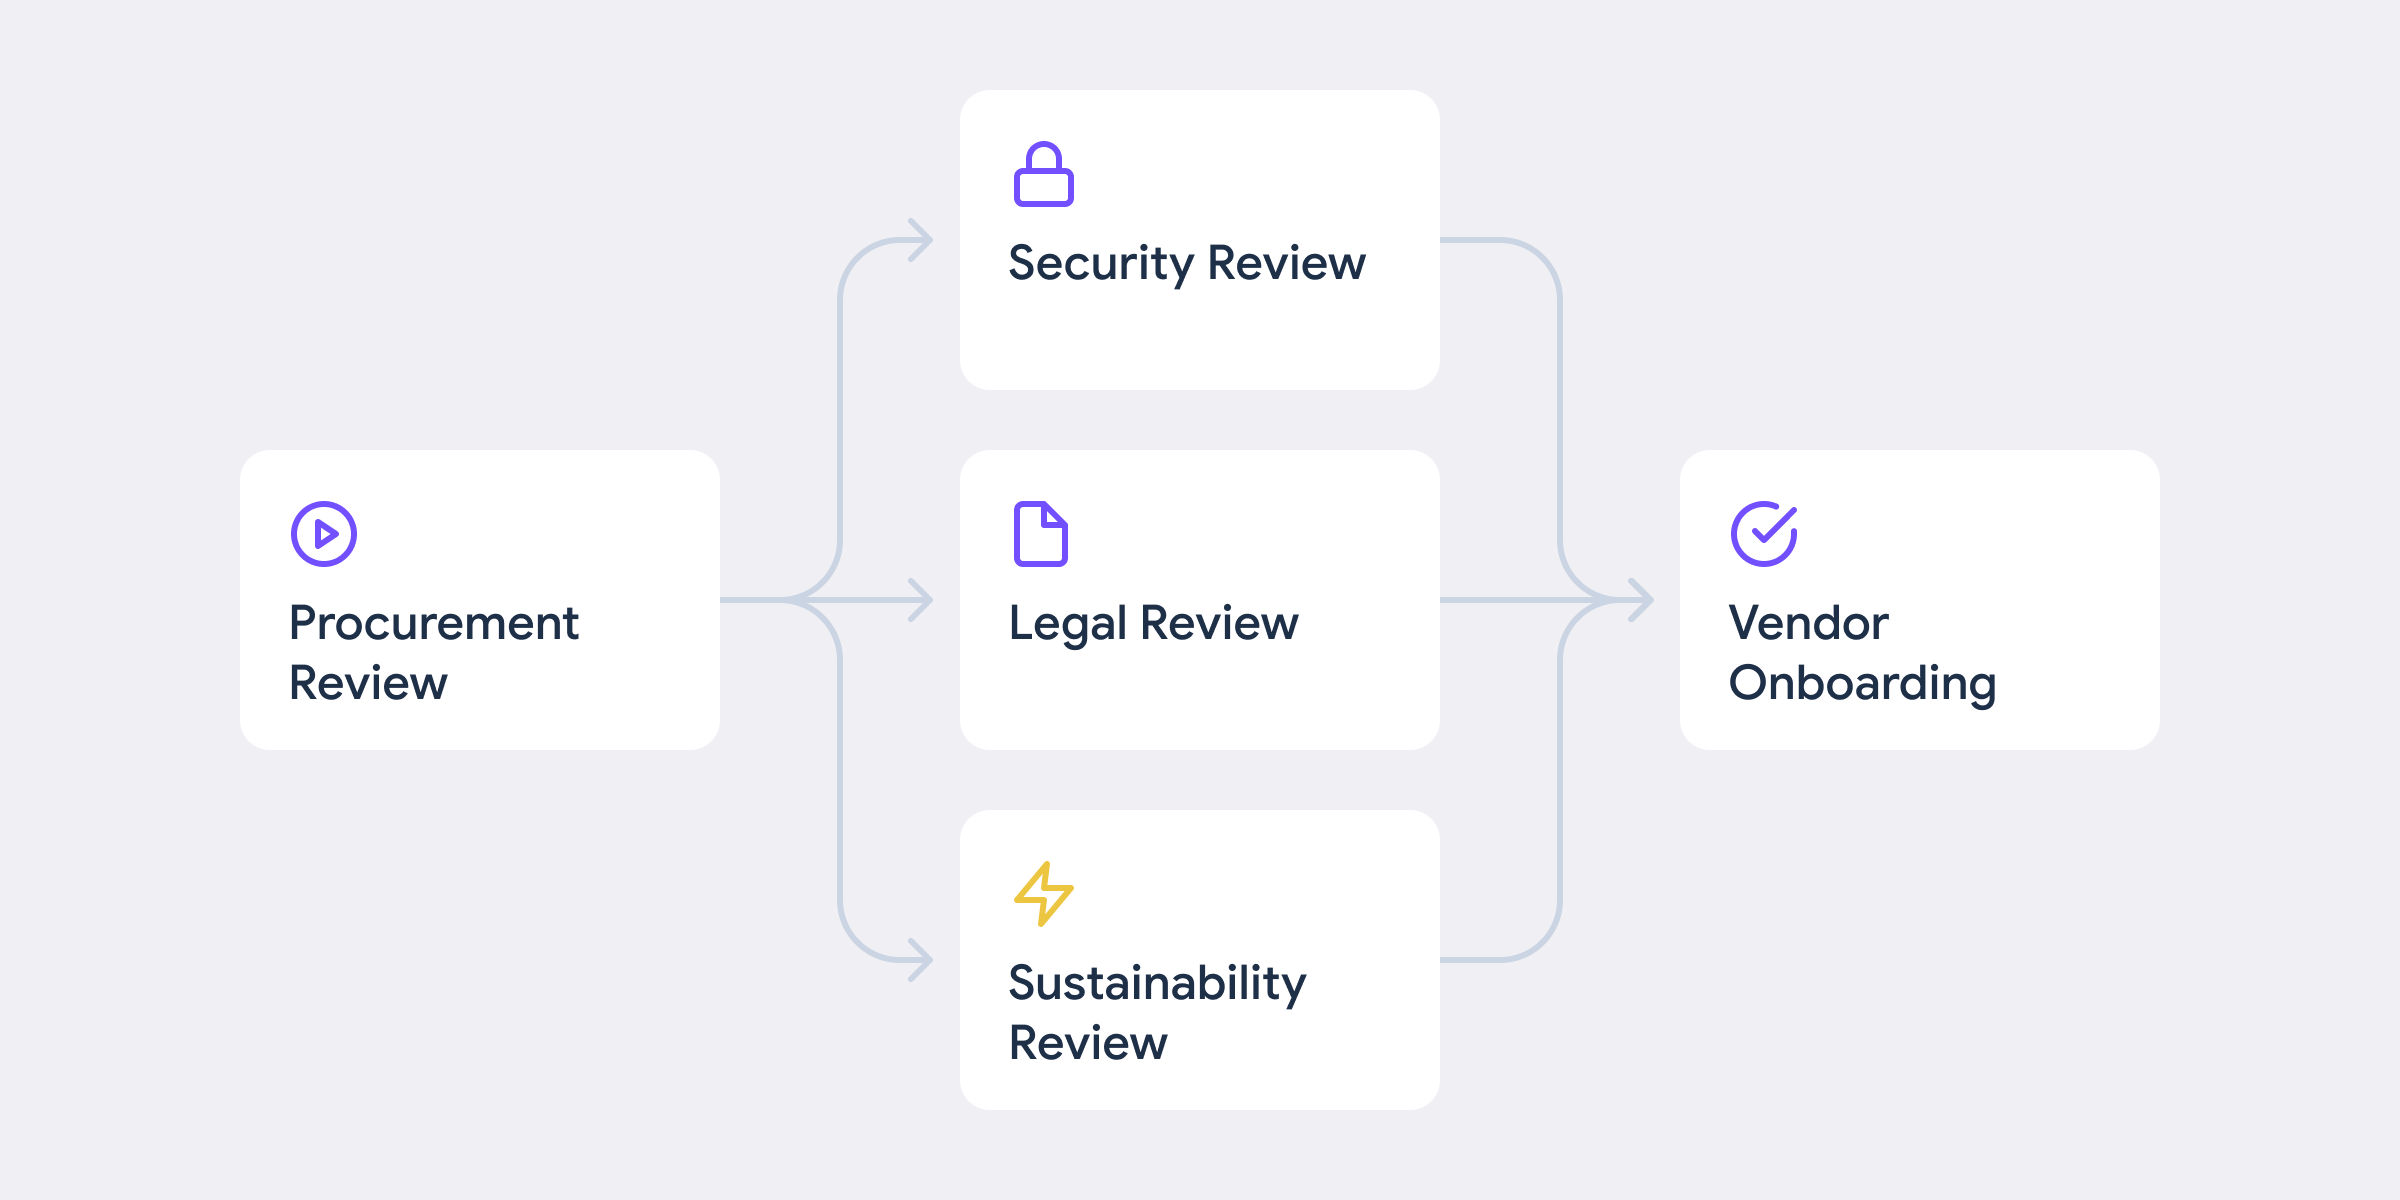 The vendor intake flow, including security, legal, and sustainability review